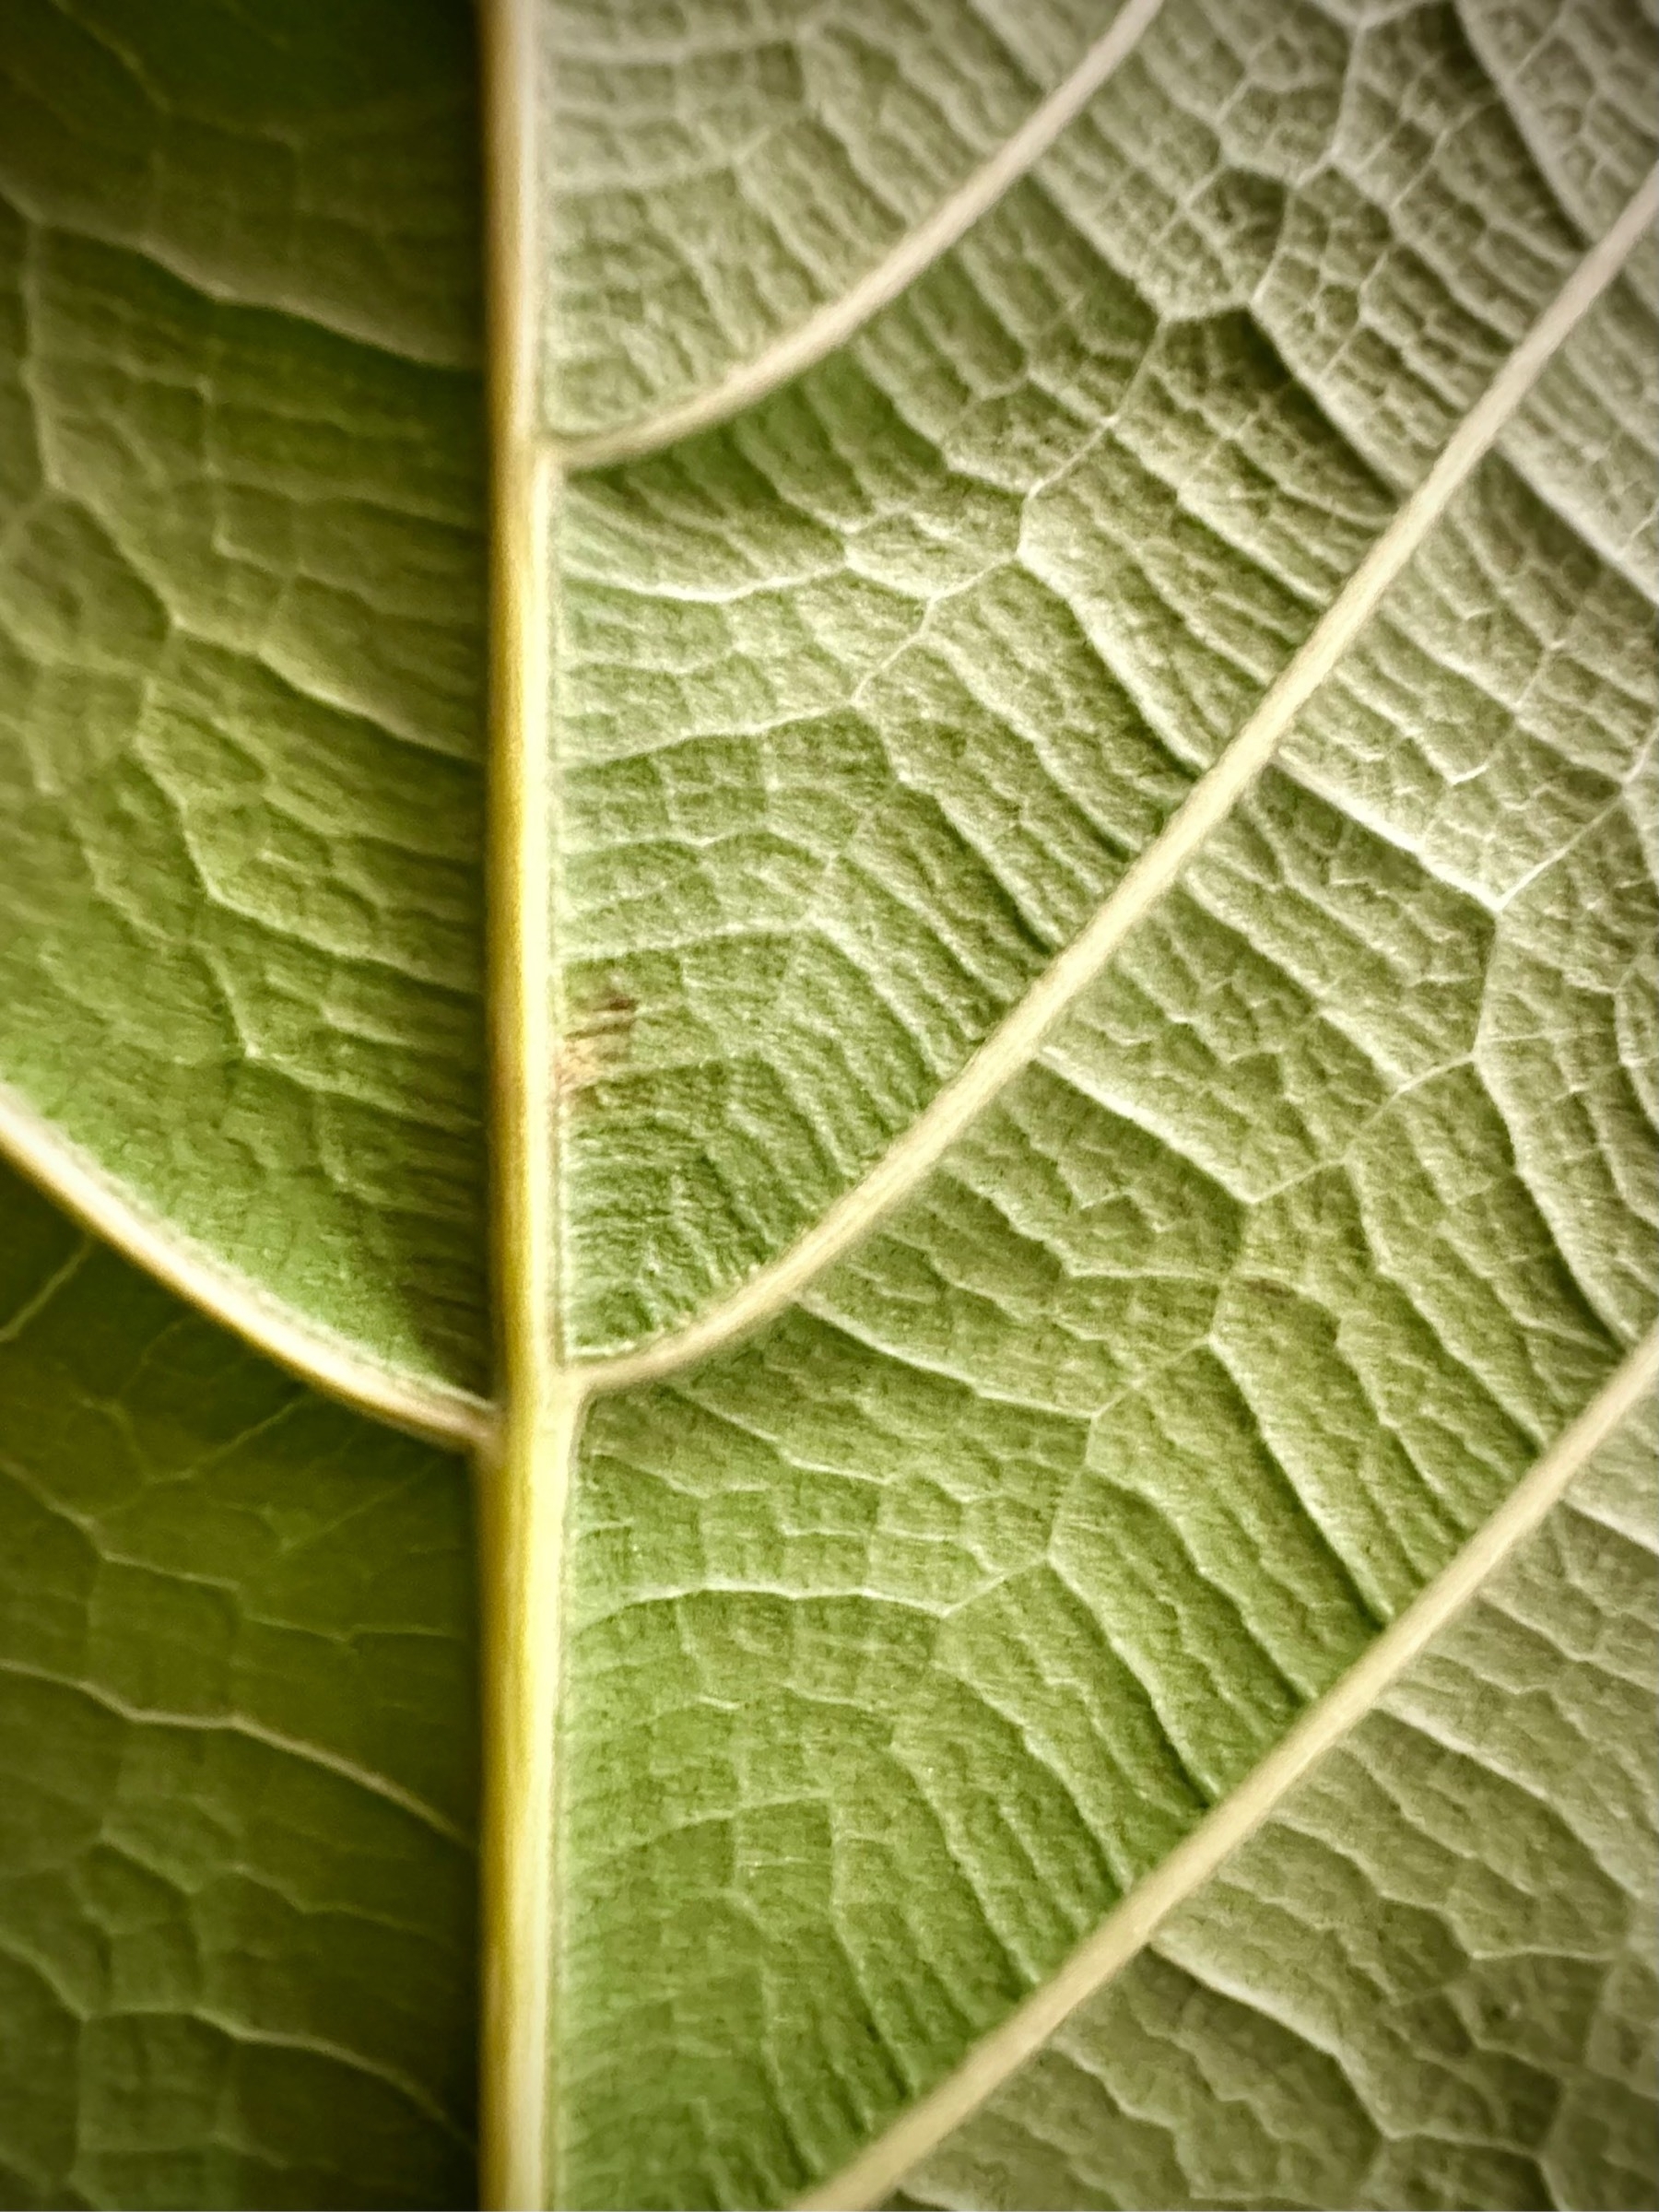 A closeup of the arteries, veins, and capillaries of a fiddle leaf fig.